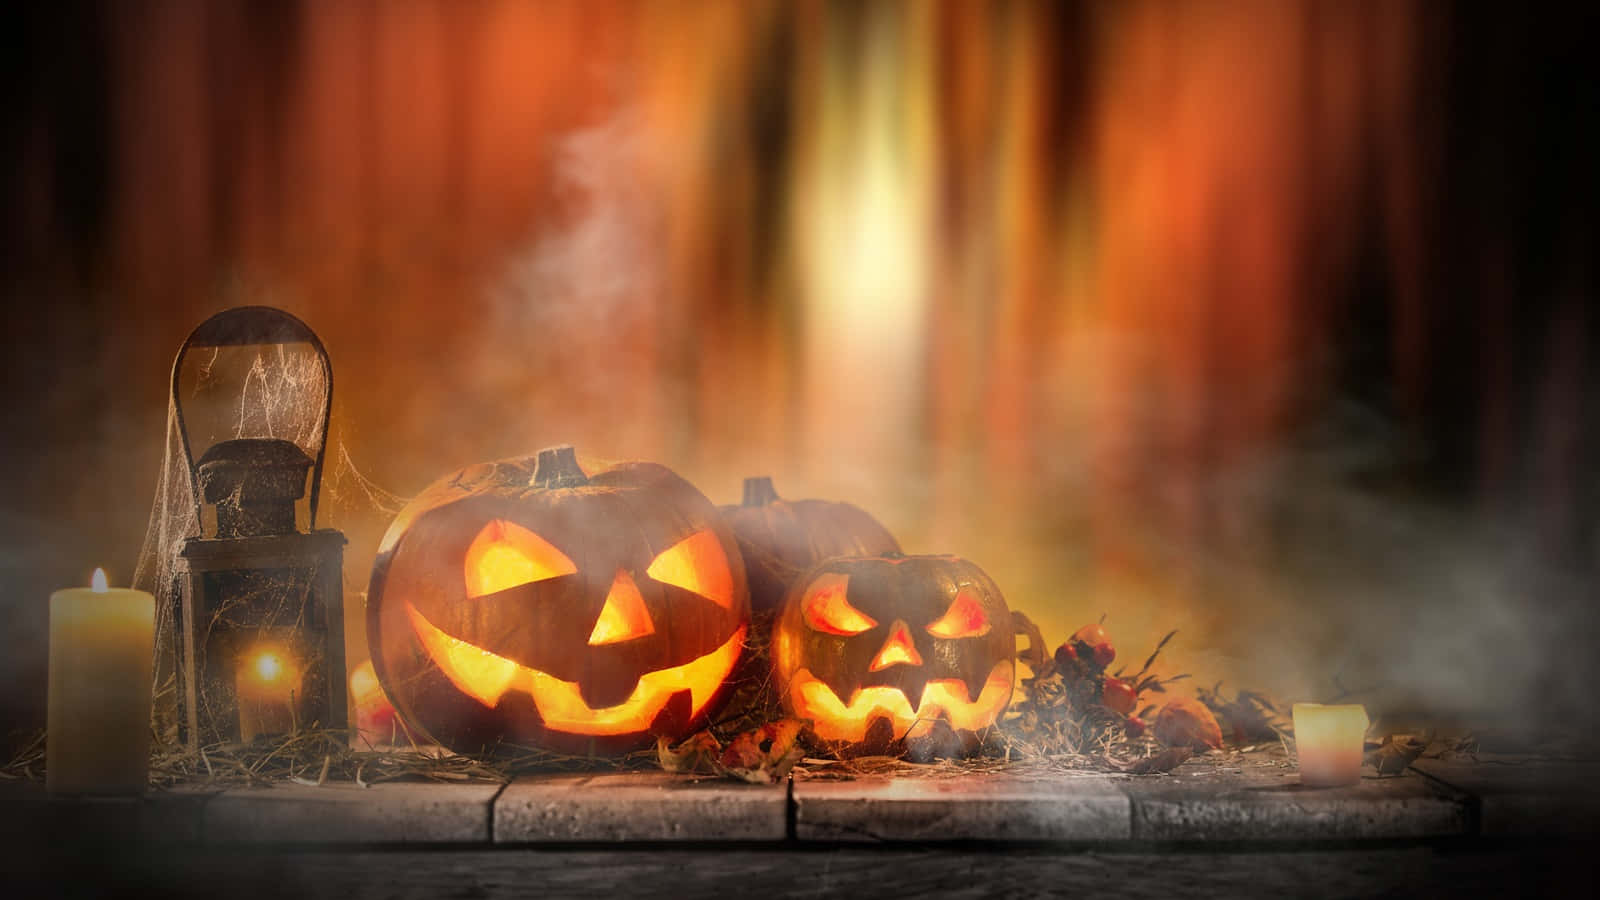 Set the mood on Halloween night with flickering candles! Wallpaper